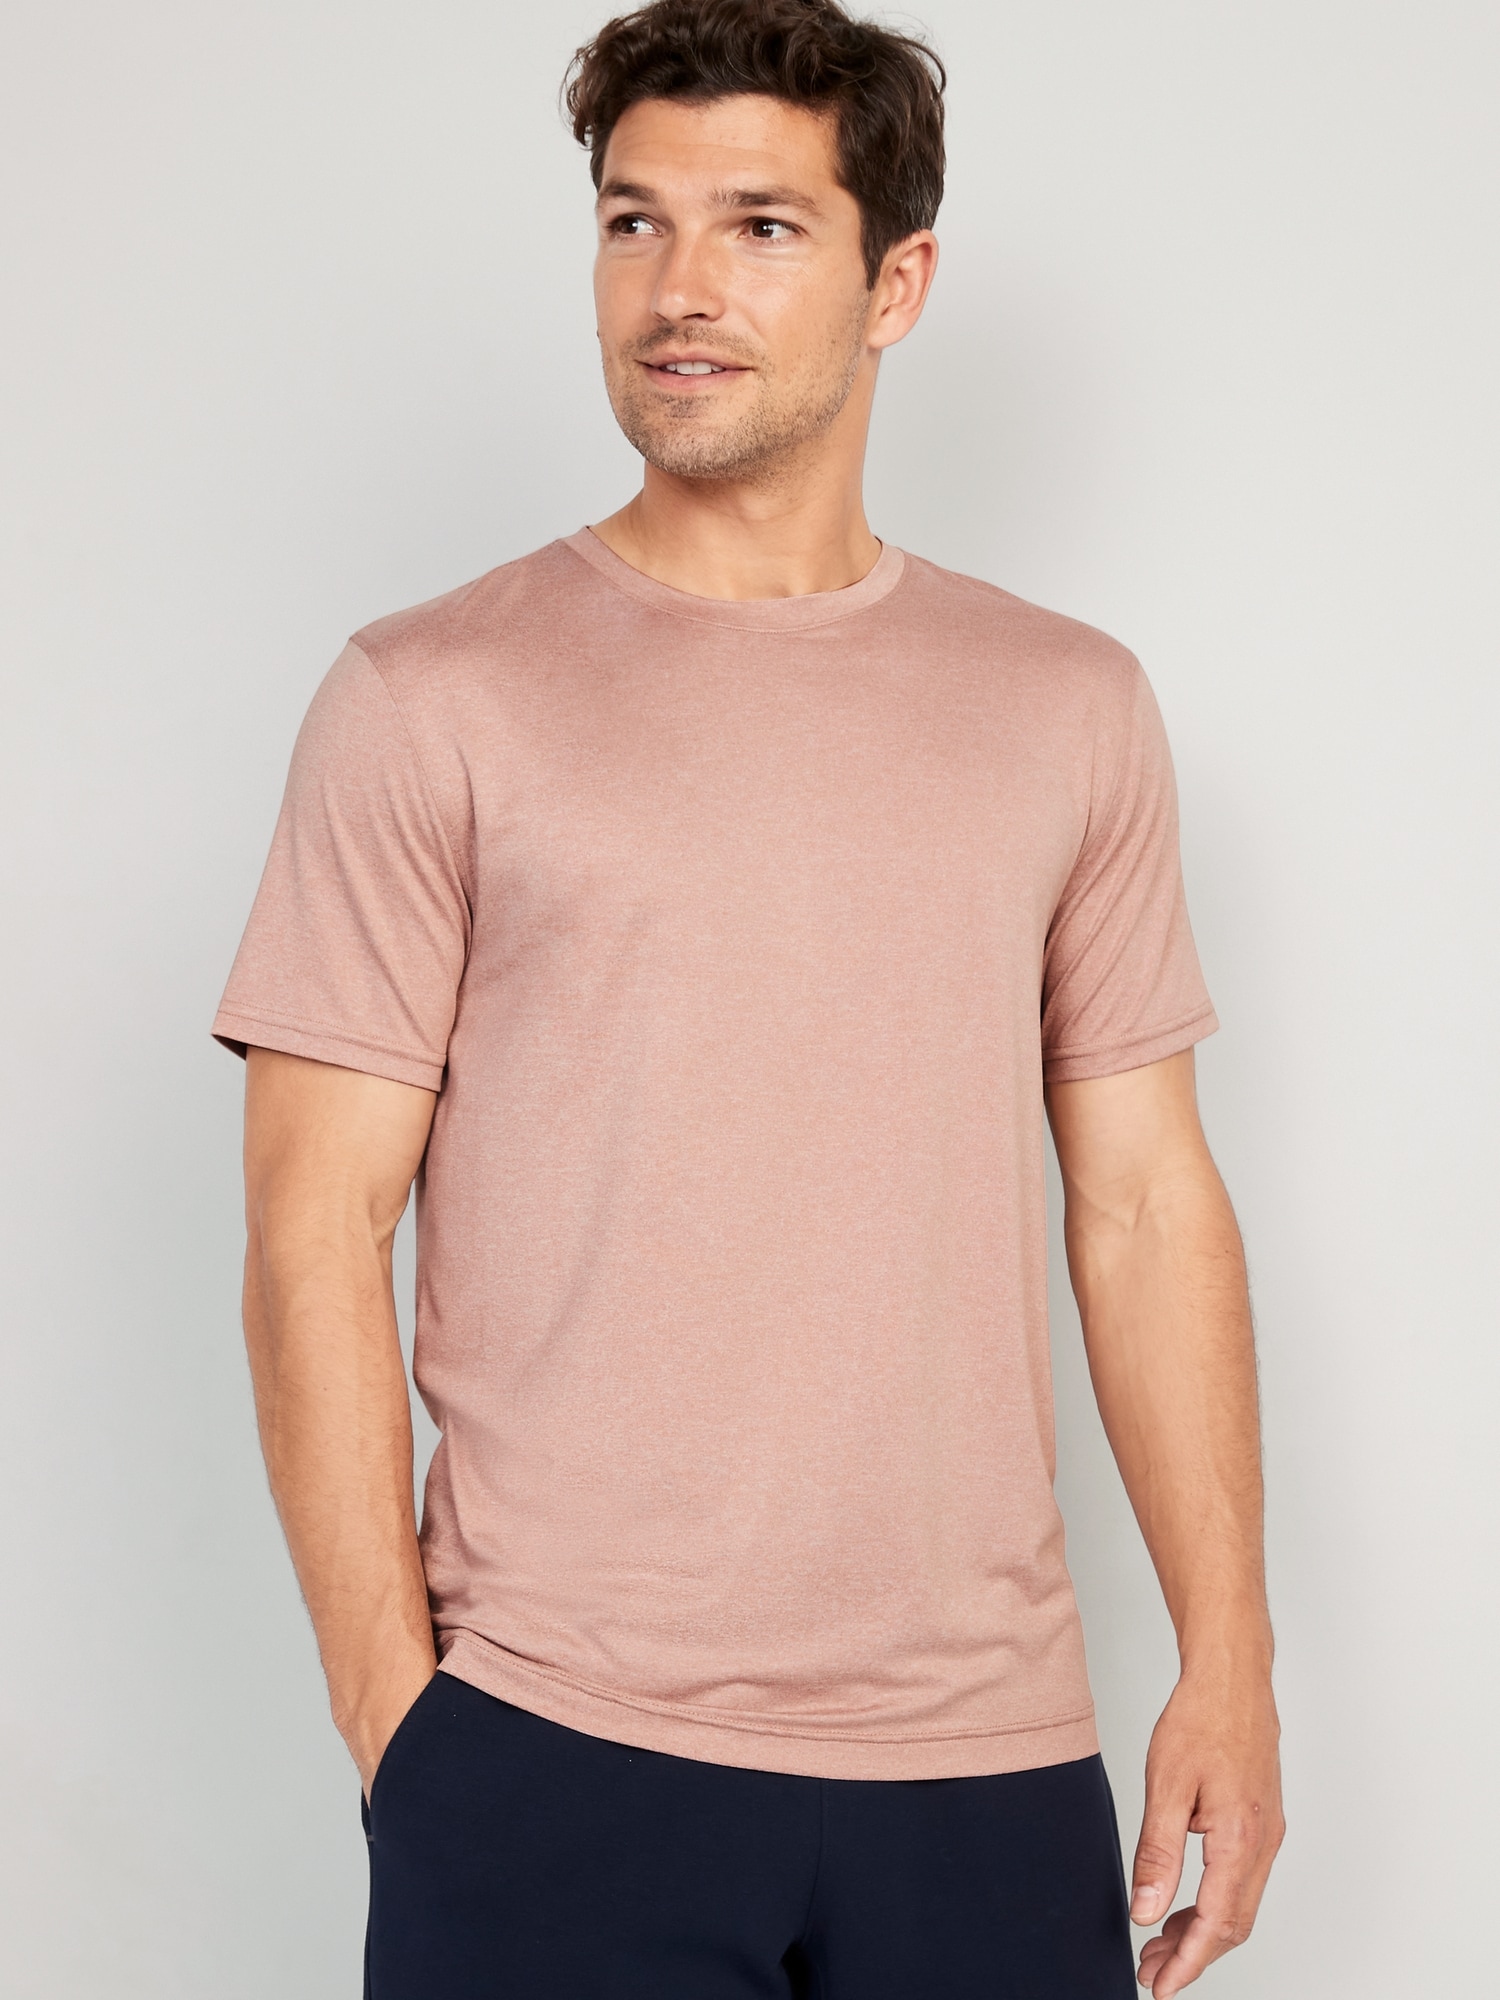 Old Navy Cloud 94 Soft Go-Dry Cool T-Shirt for Men pink. 1